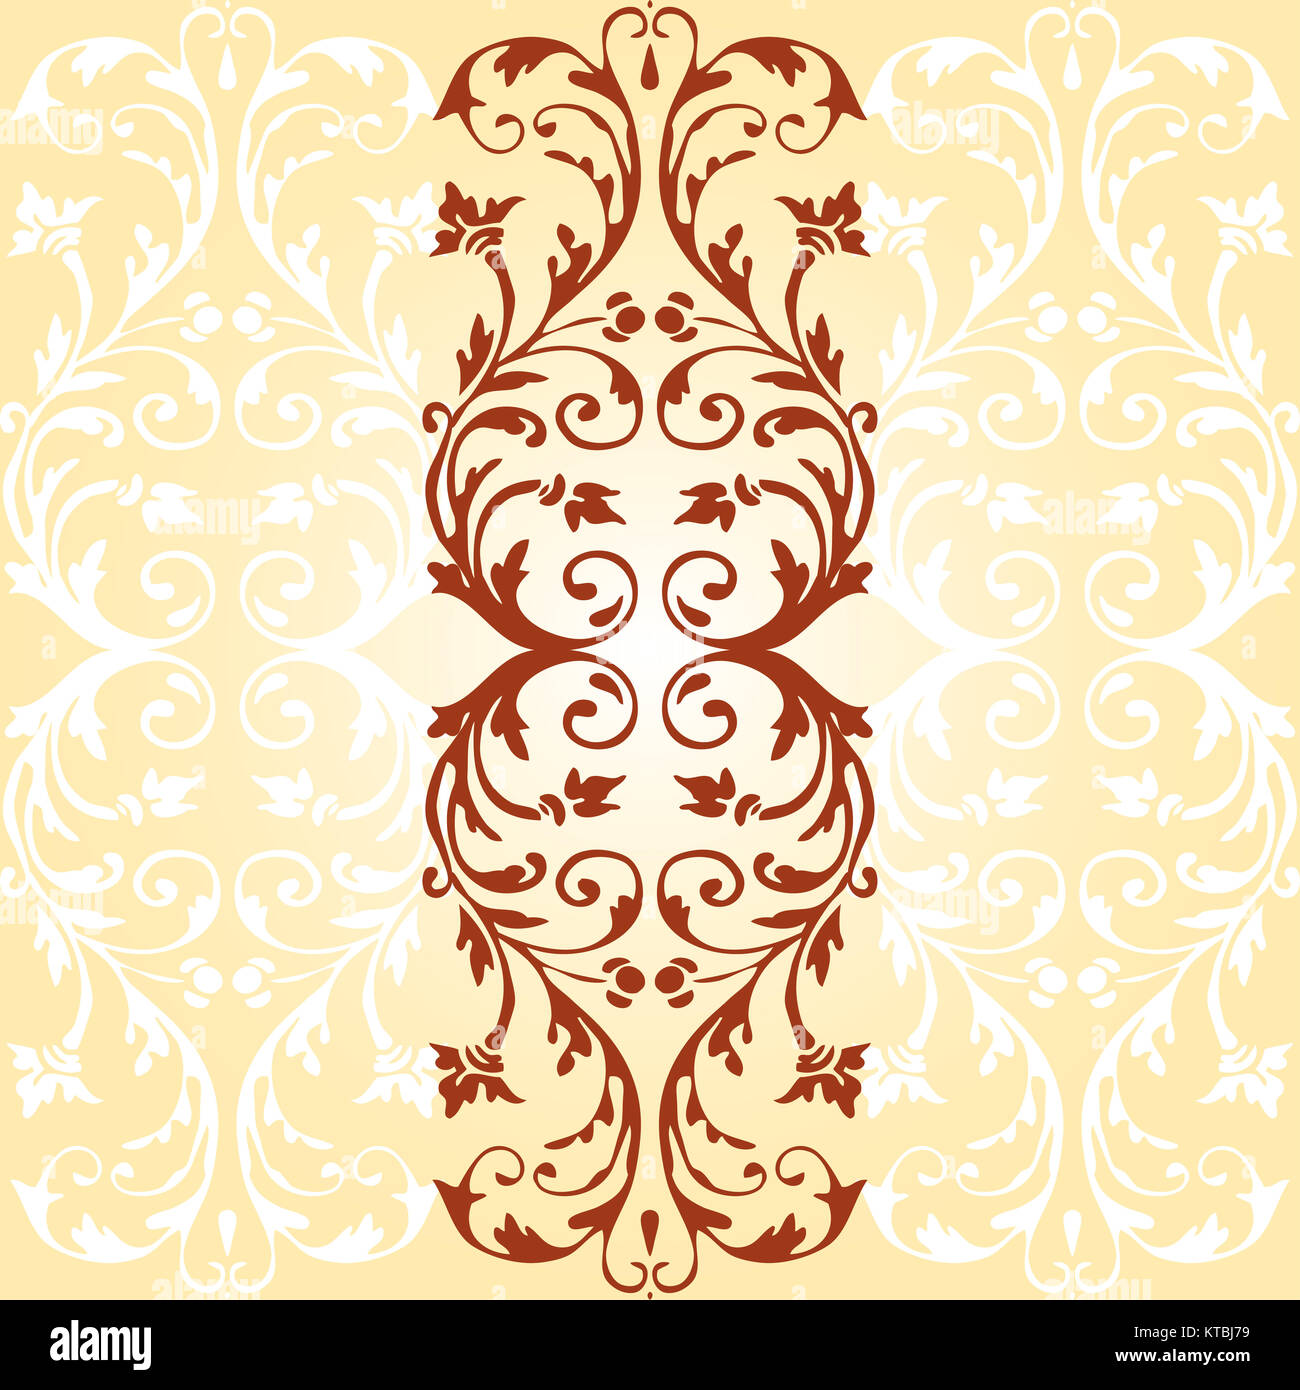 Vector card with vintage ornaments flourishes with floral elements border Stock Photo